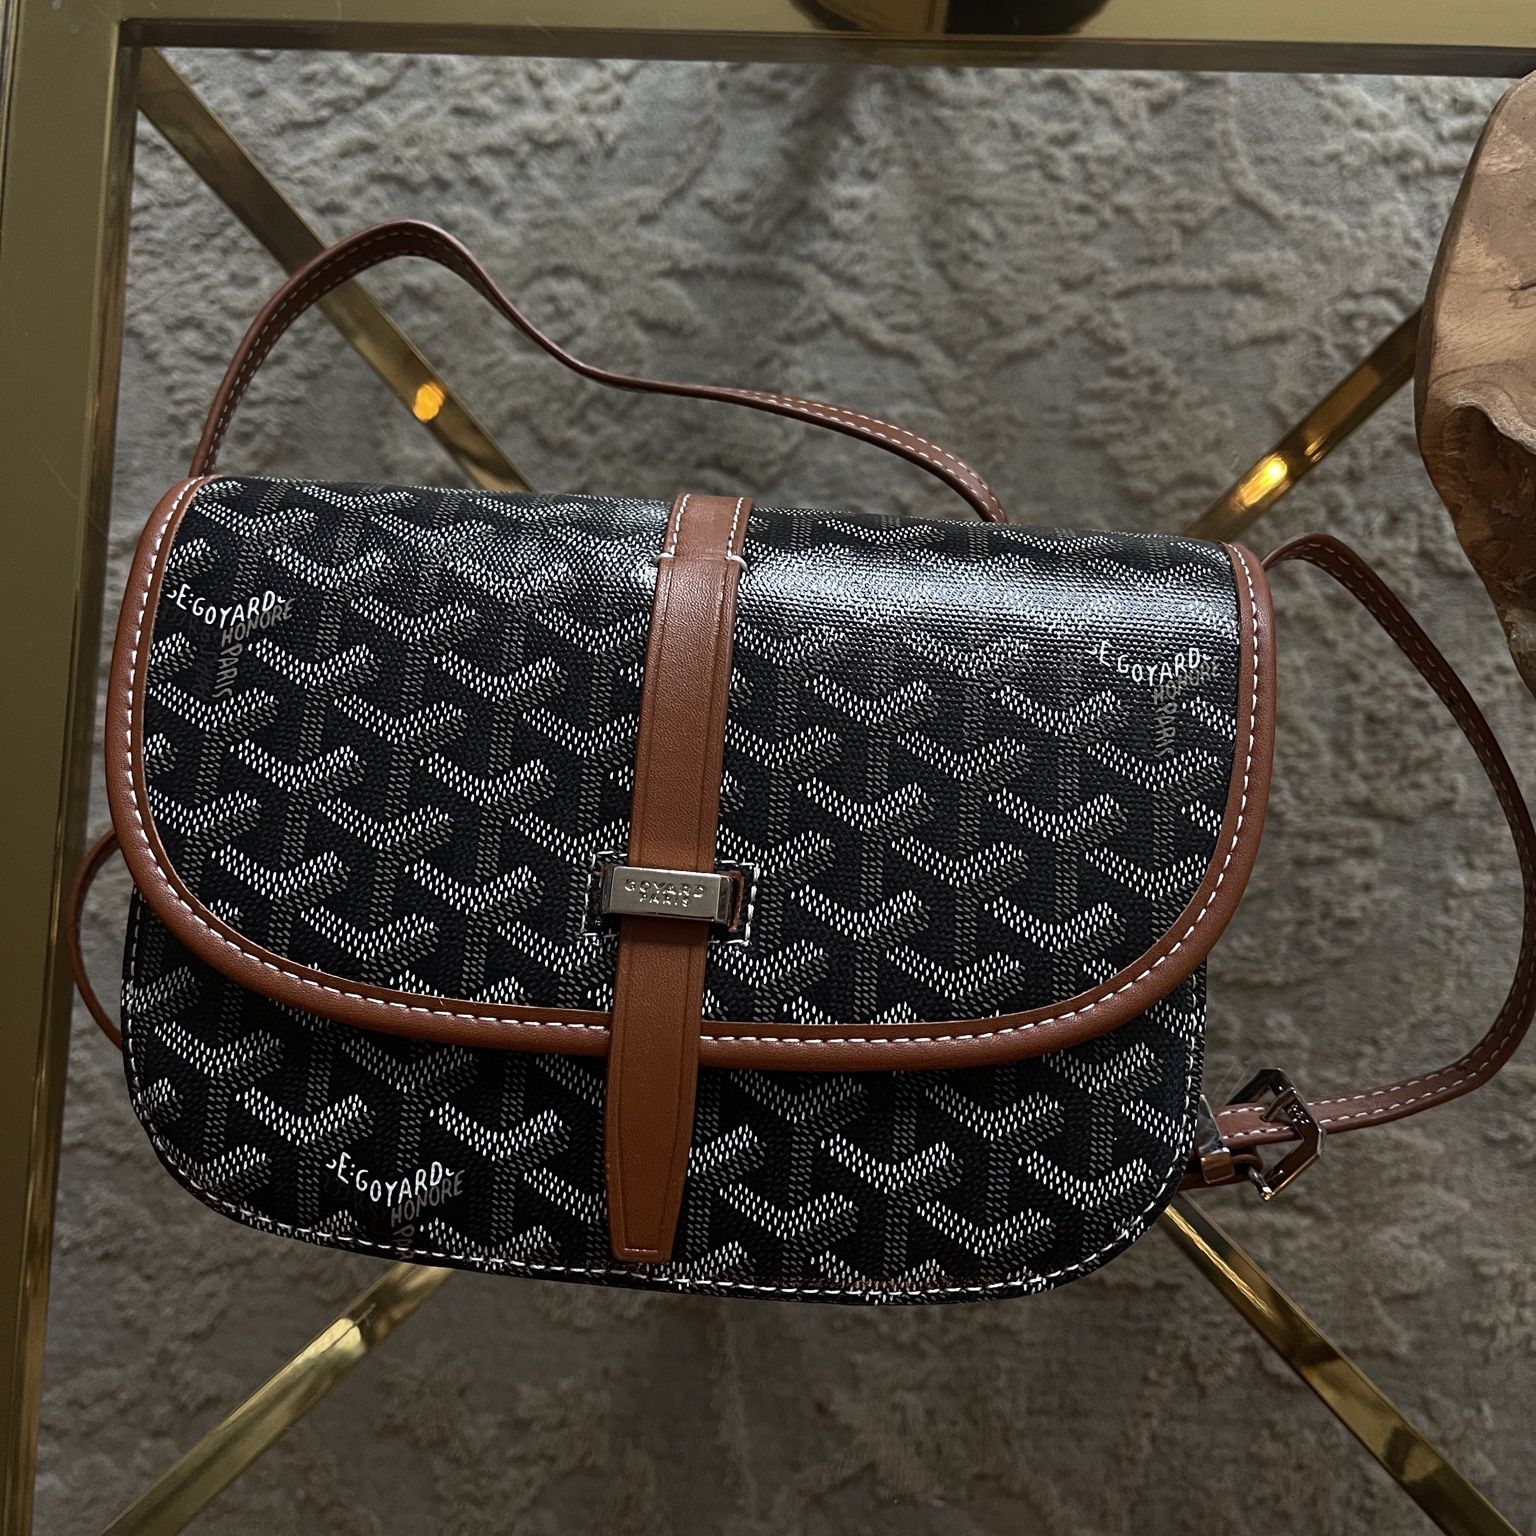 Goyard Tote for Sale in Bothell, WA - OfferUp